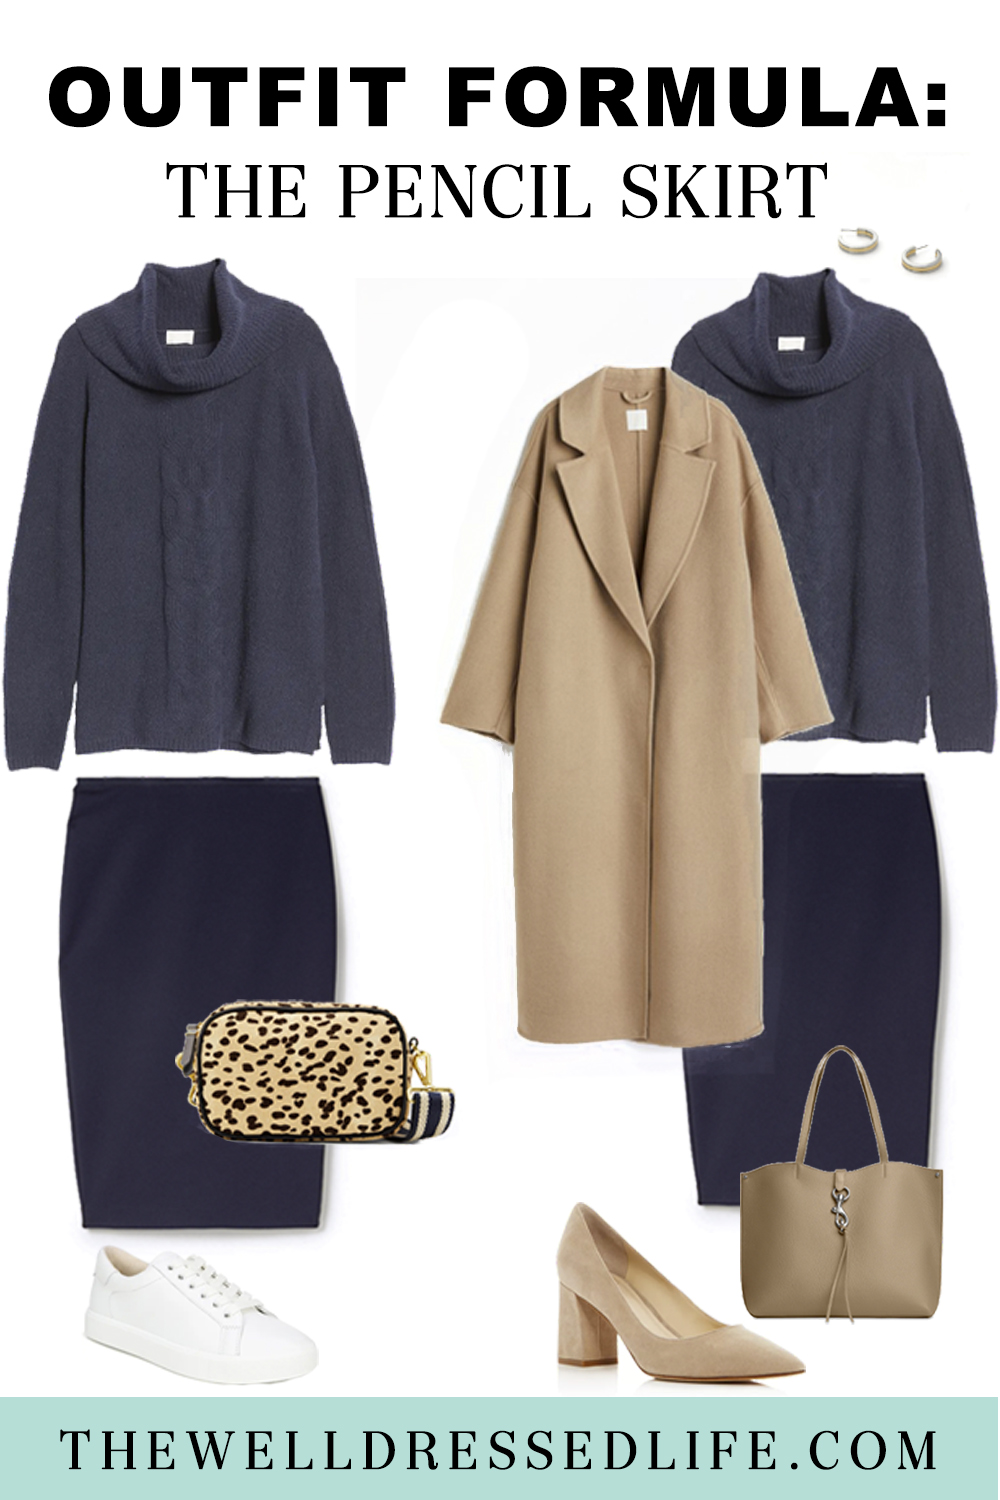 Outfit Formula: The Pencil Skirt